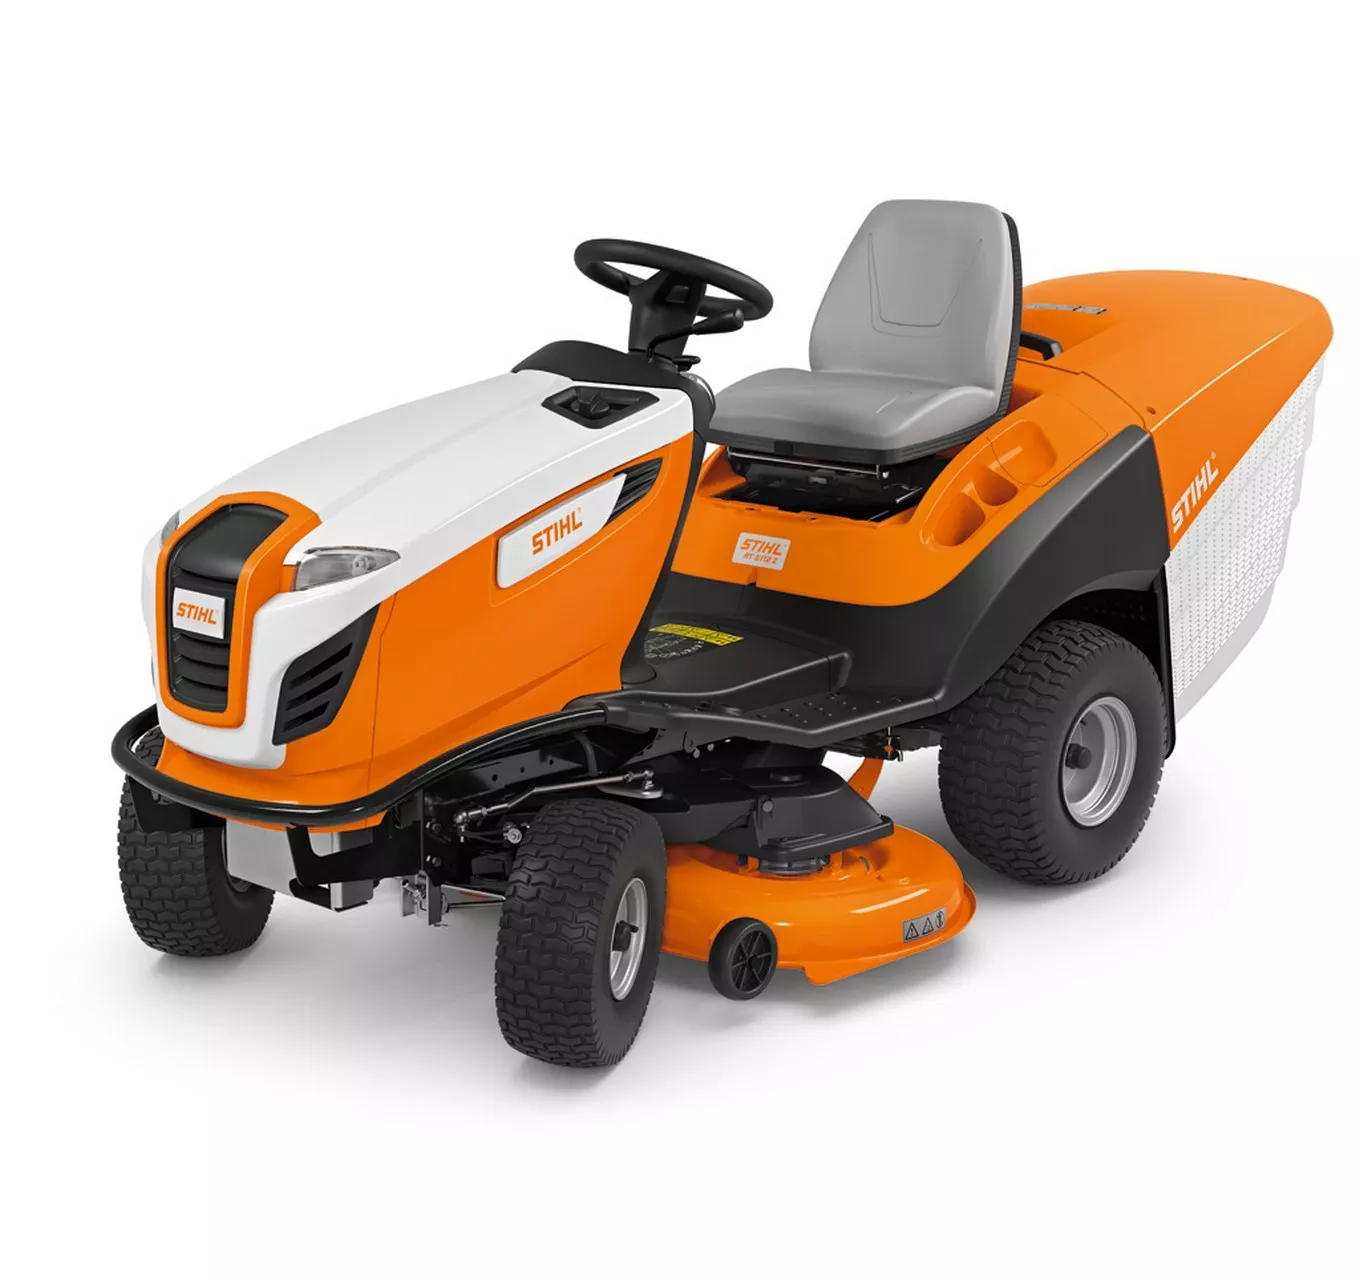 RT 5112 Z Lawn Tractor